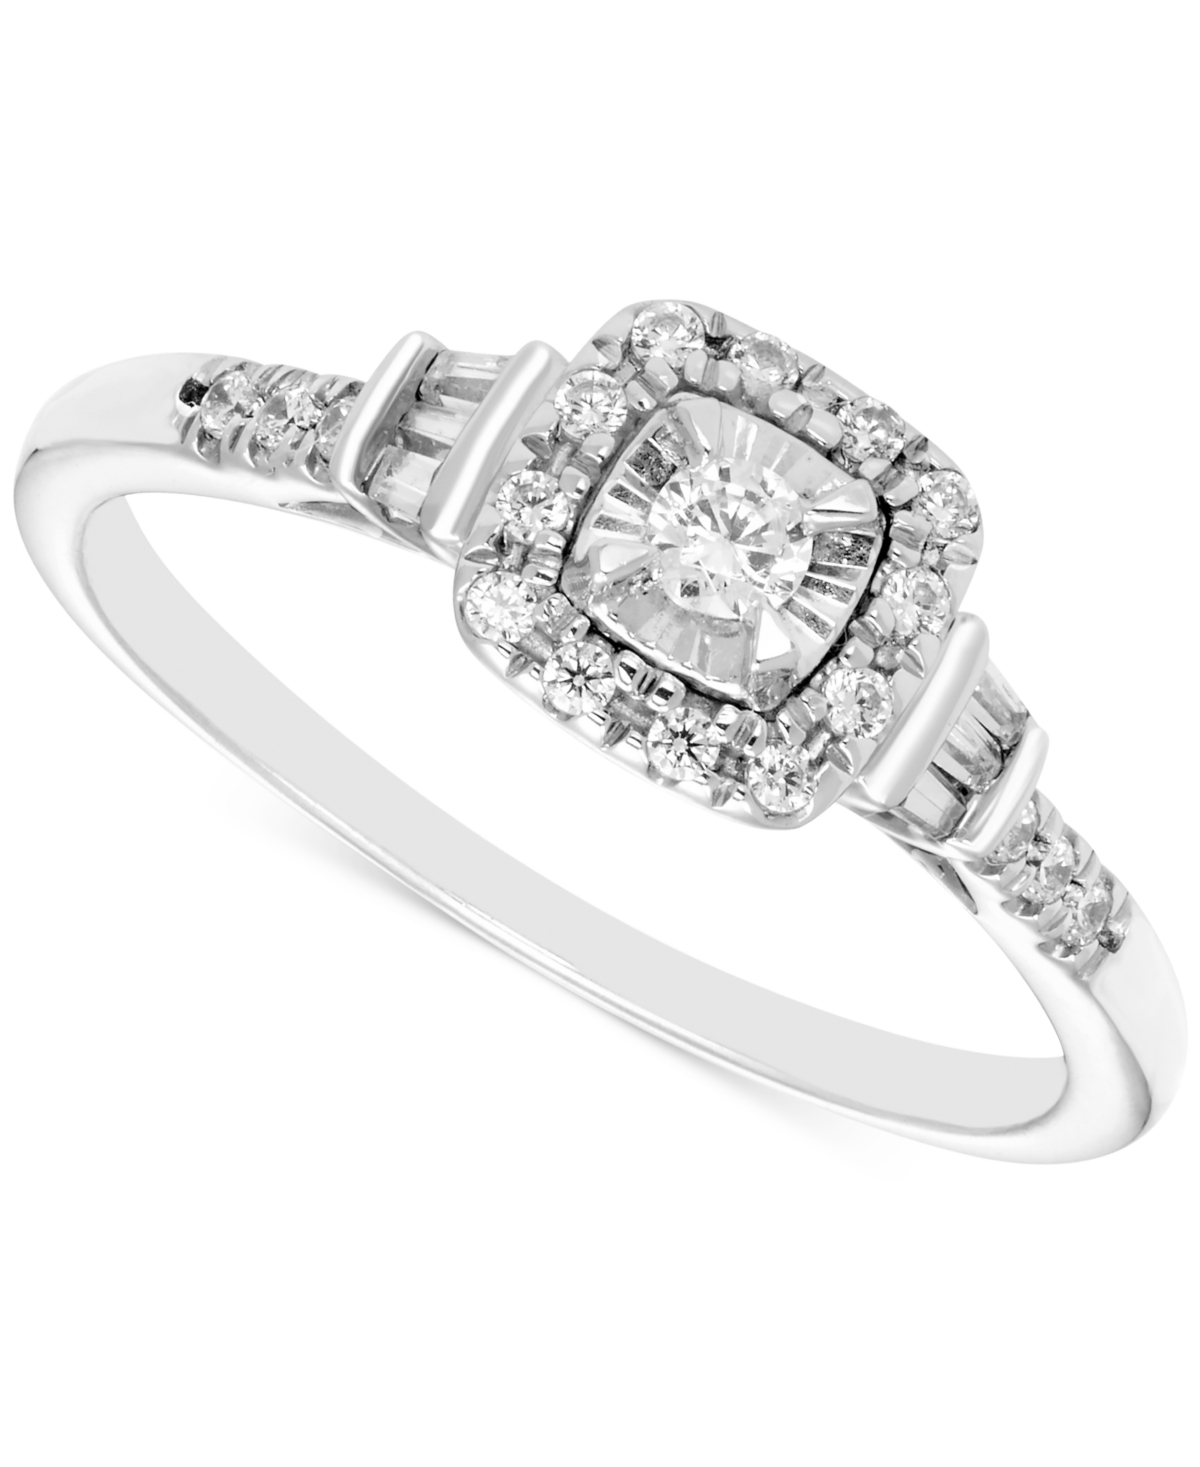 Diamond Halo Engagement Ring (1/4 ct. t.w.) in 14k White Gold - White Gold